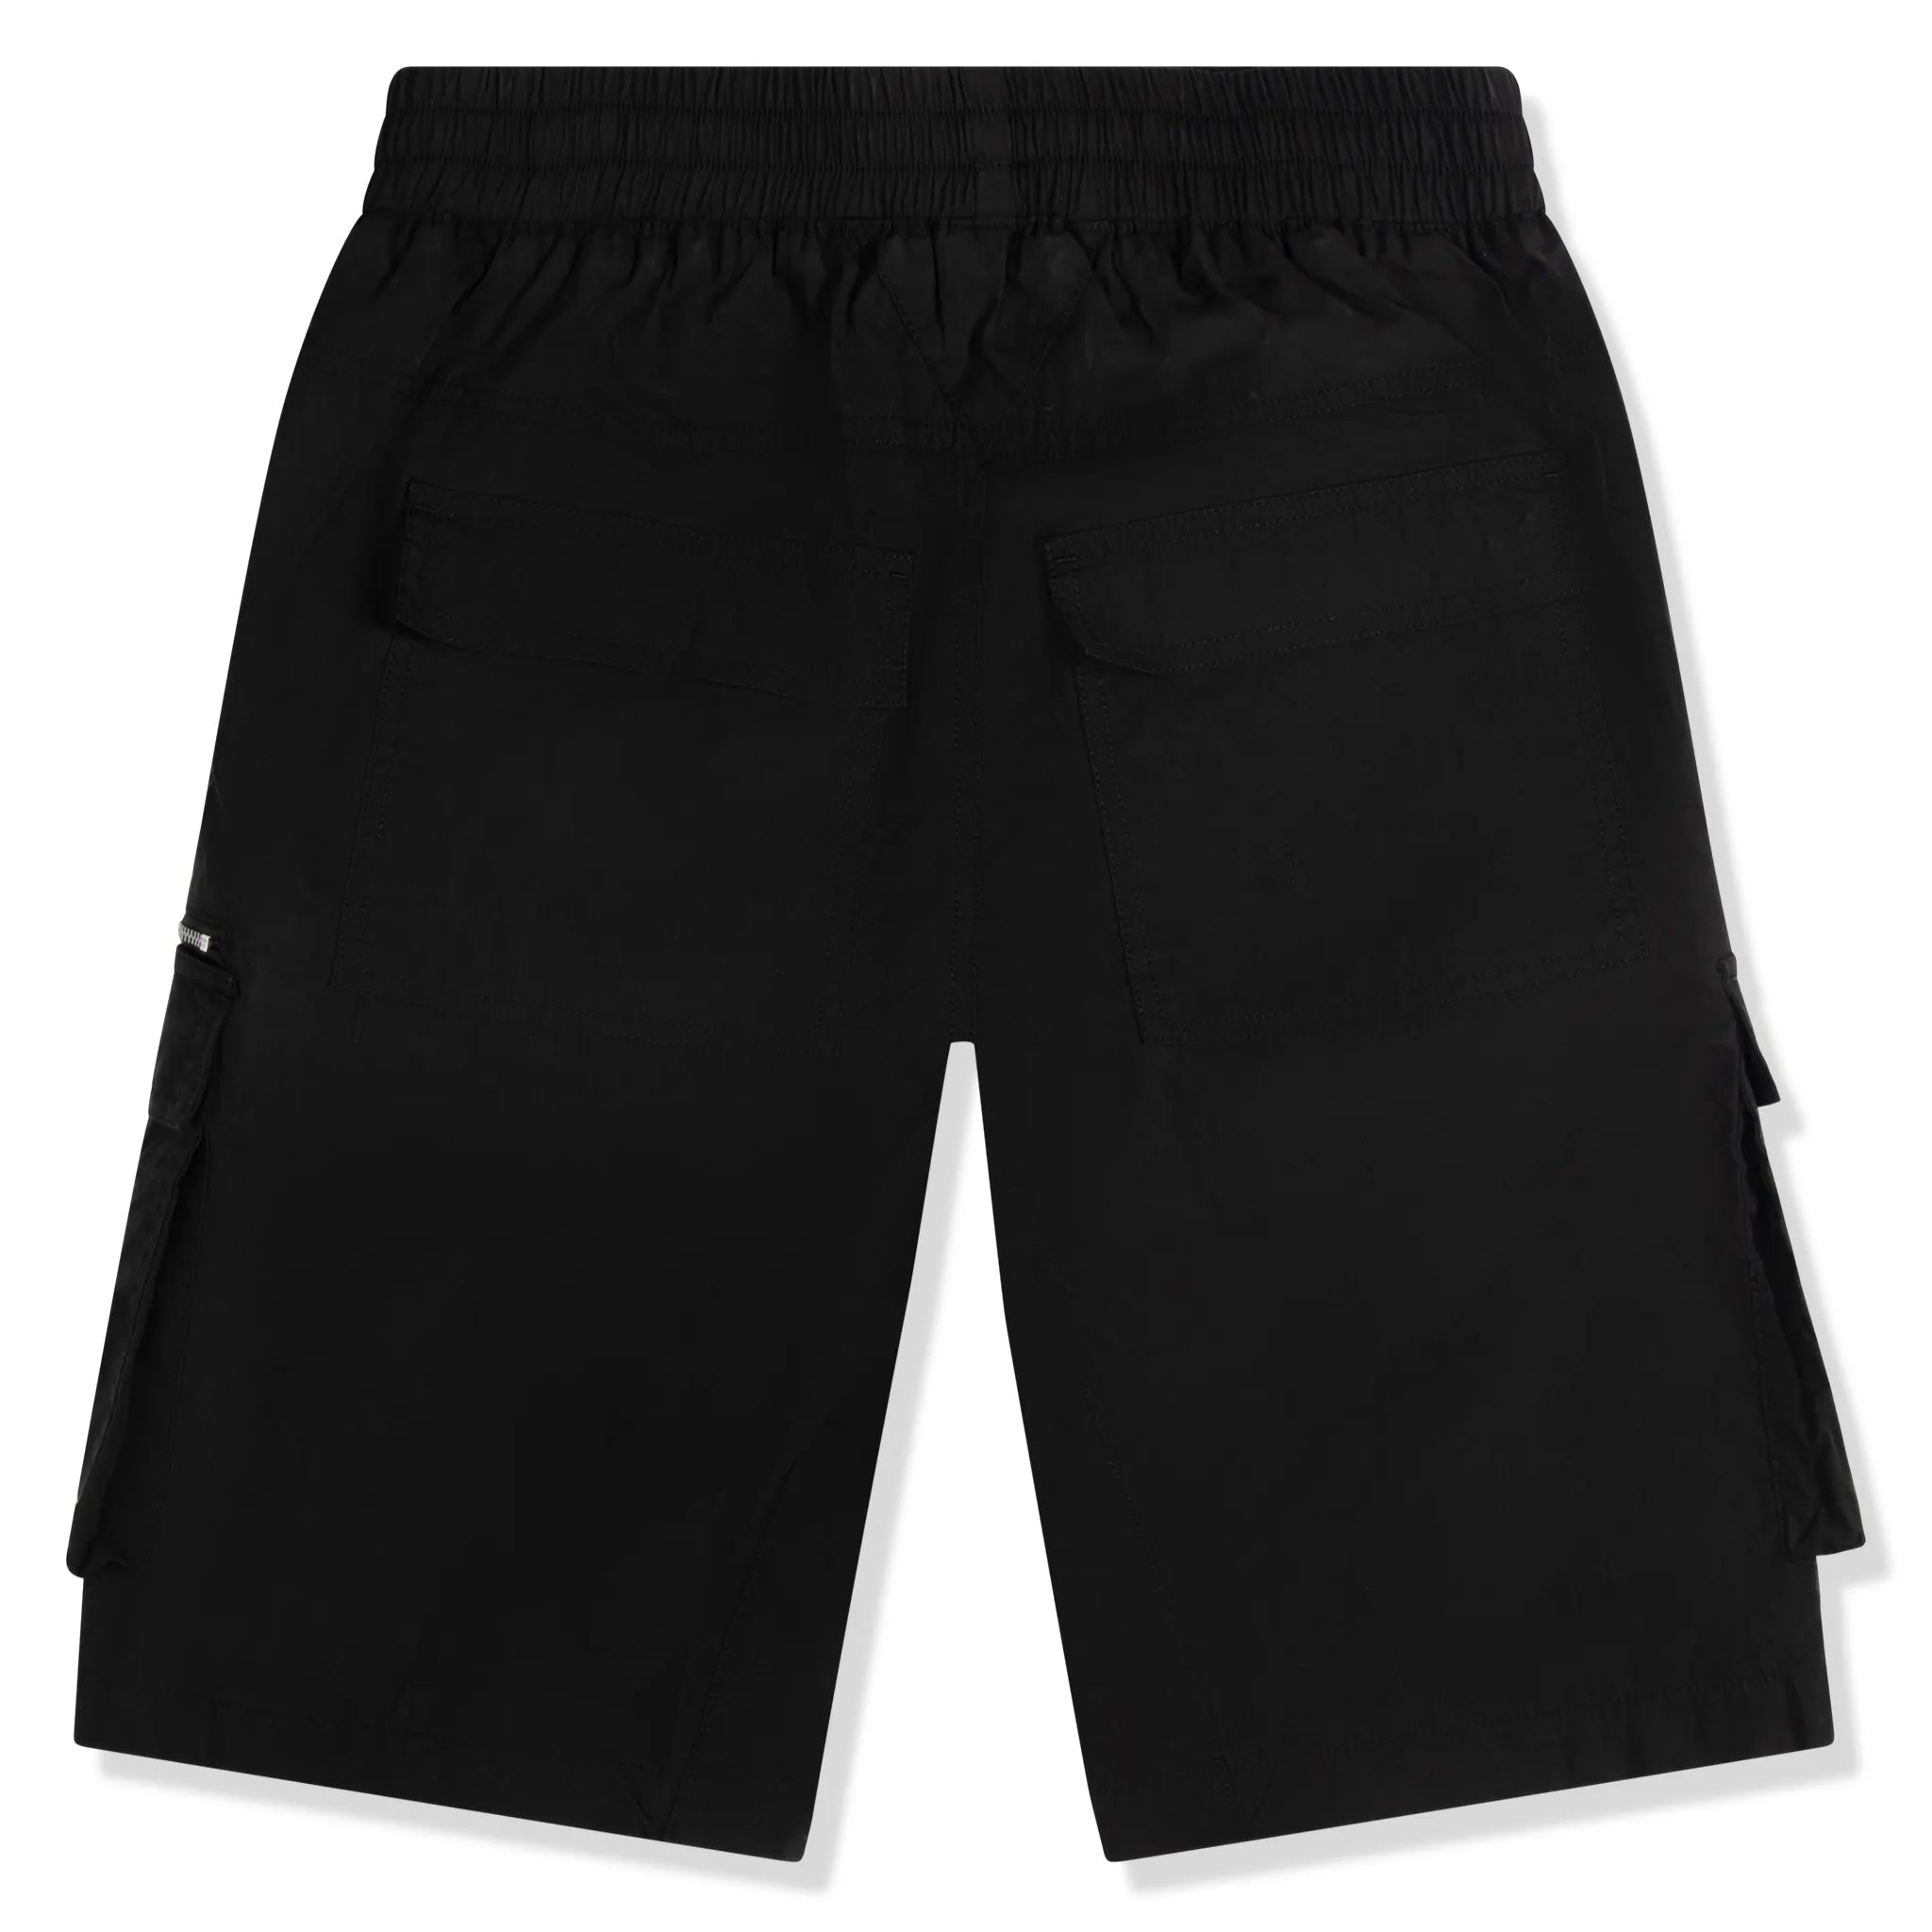 Back view of SIARR Military Shorts Black